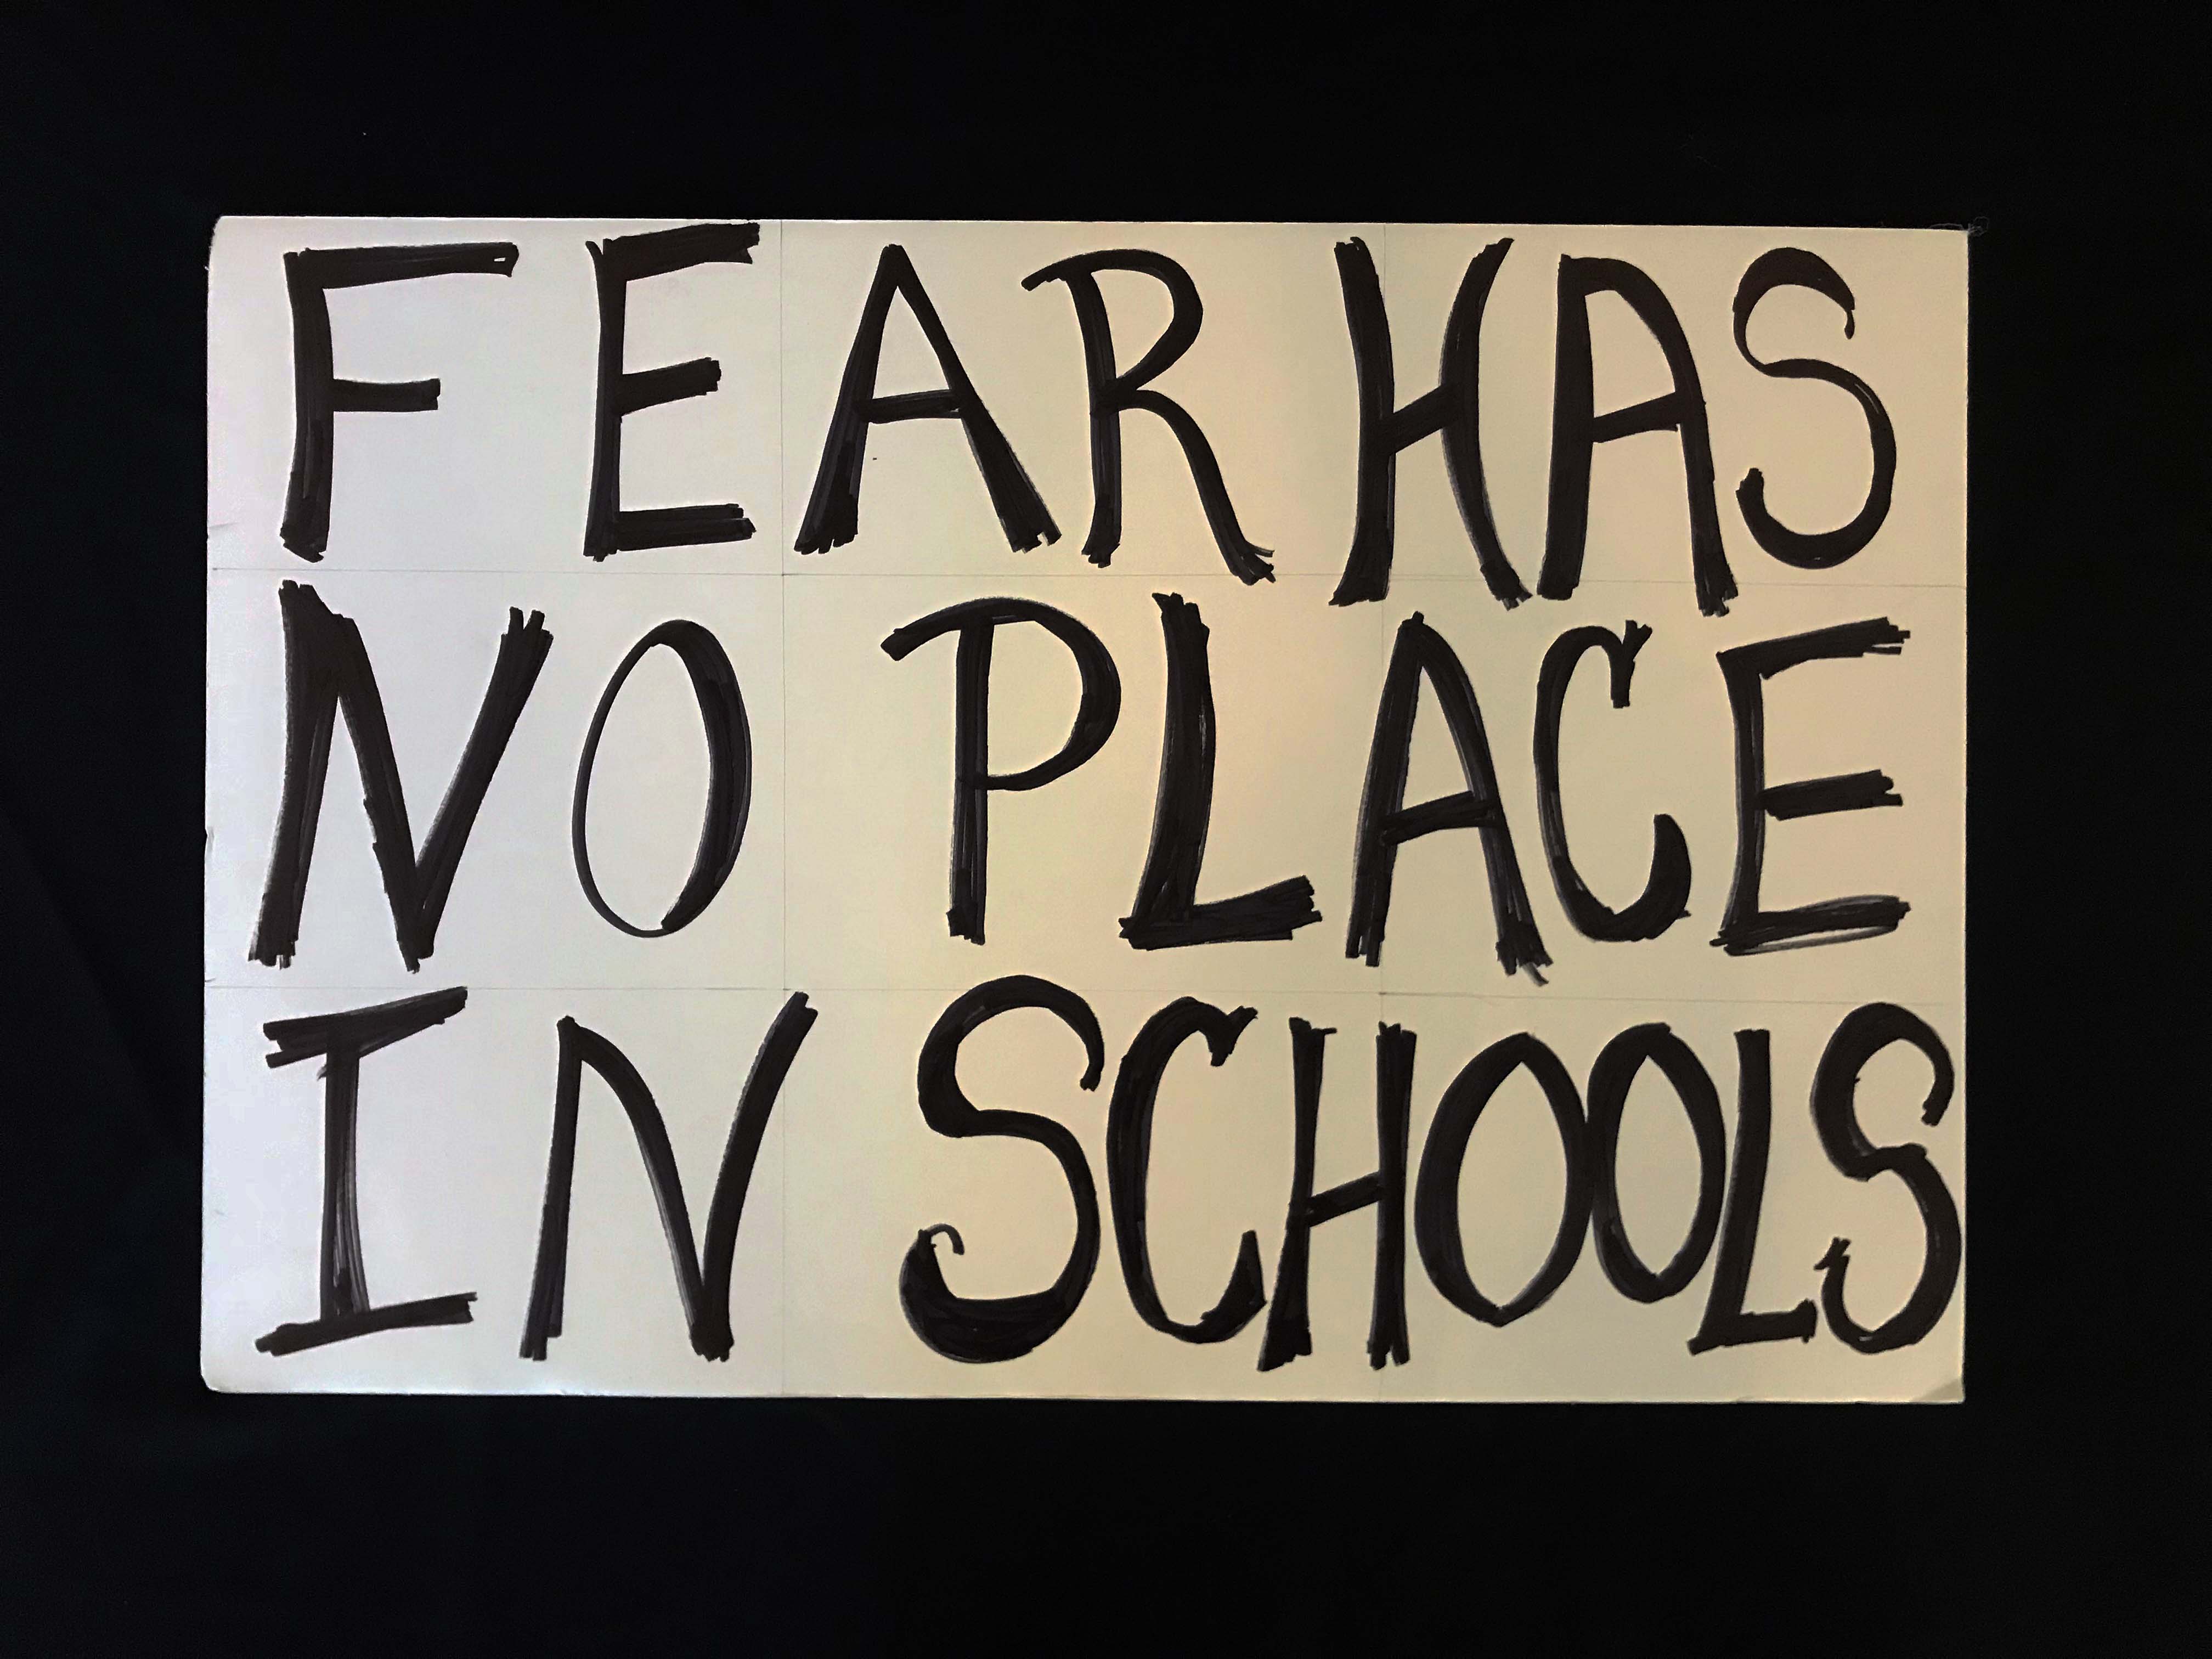 Charlotte March for Our Lives, 2018. Sign reads: "Fear has no place in schools."